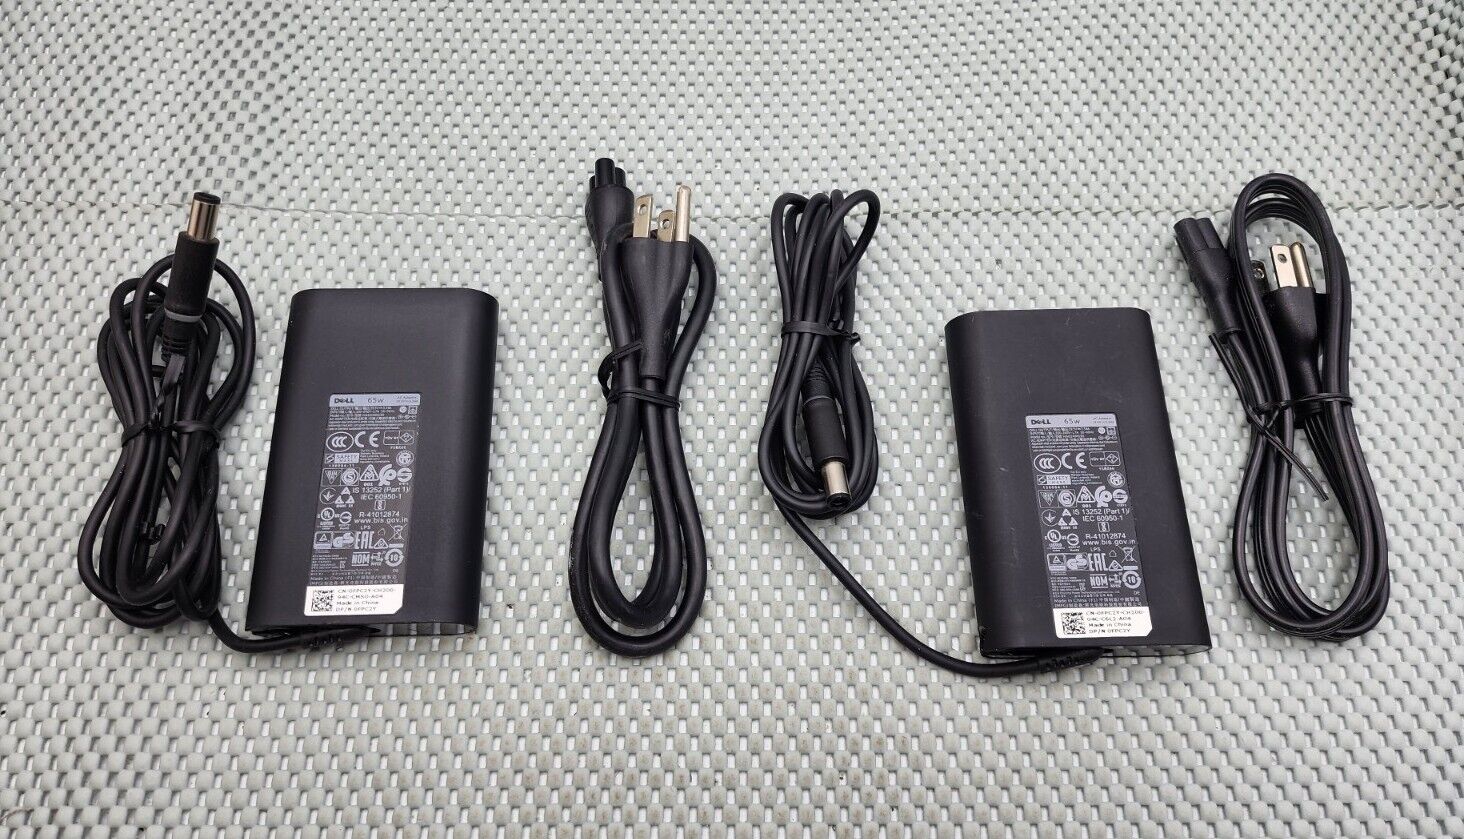 LOT OF 2 Dell 65W 19.5V DP/N 0FPC2Y AC Power Adapter Charger Set Latitude 0G4X7T